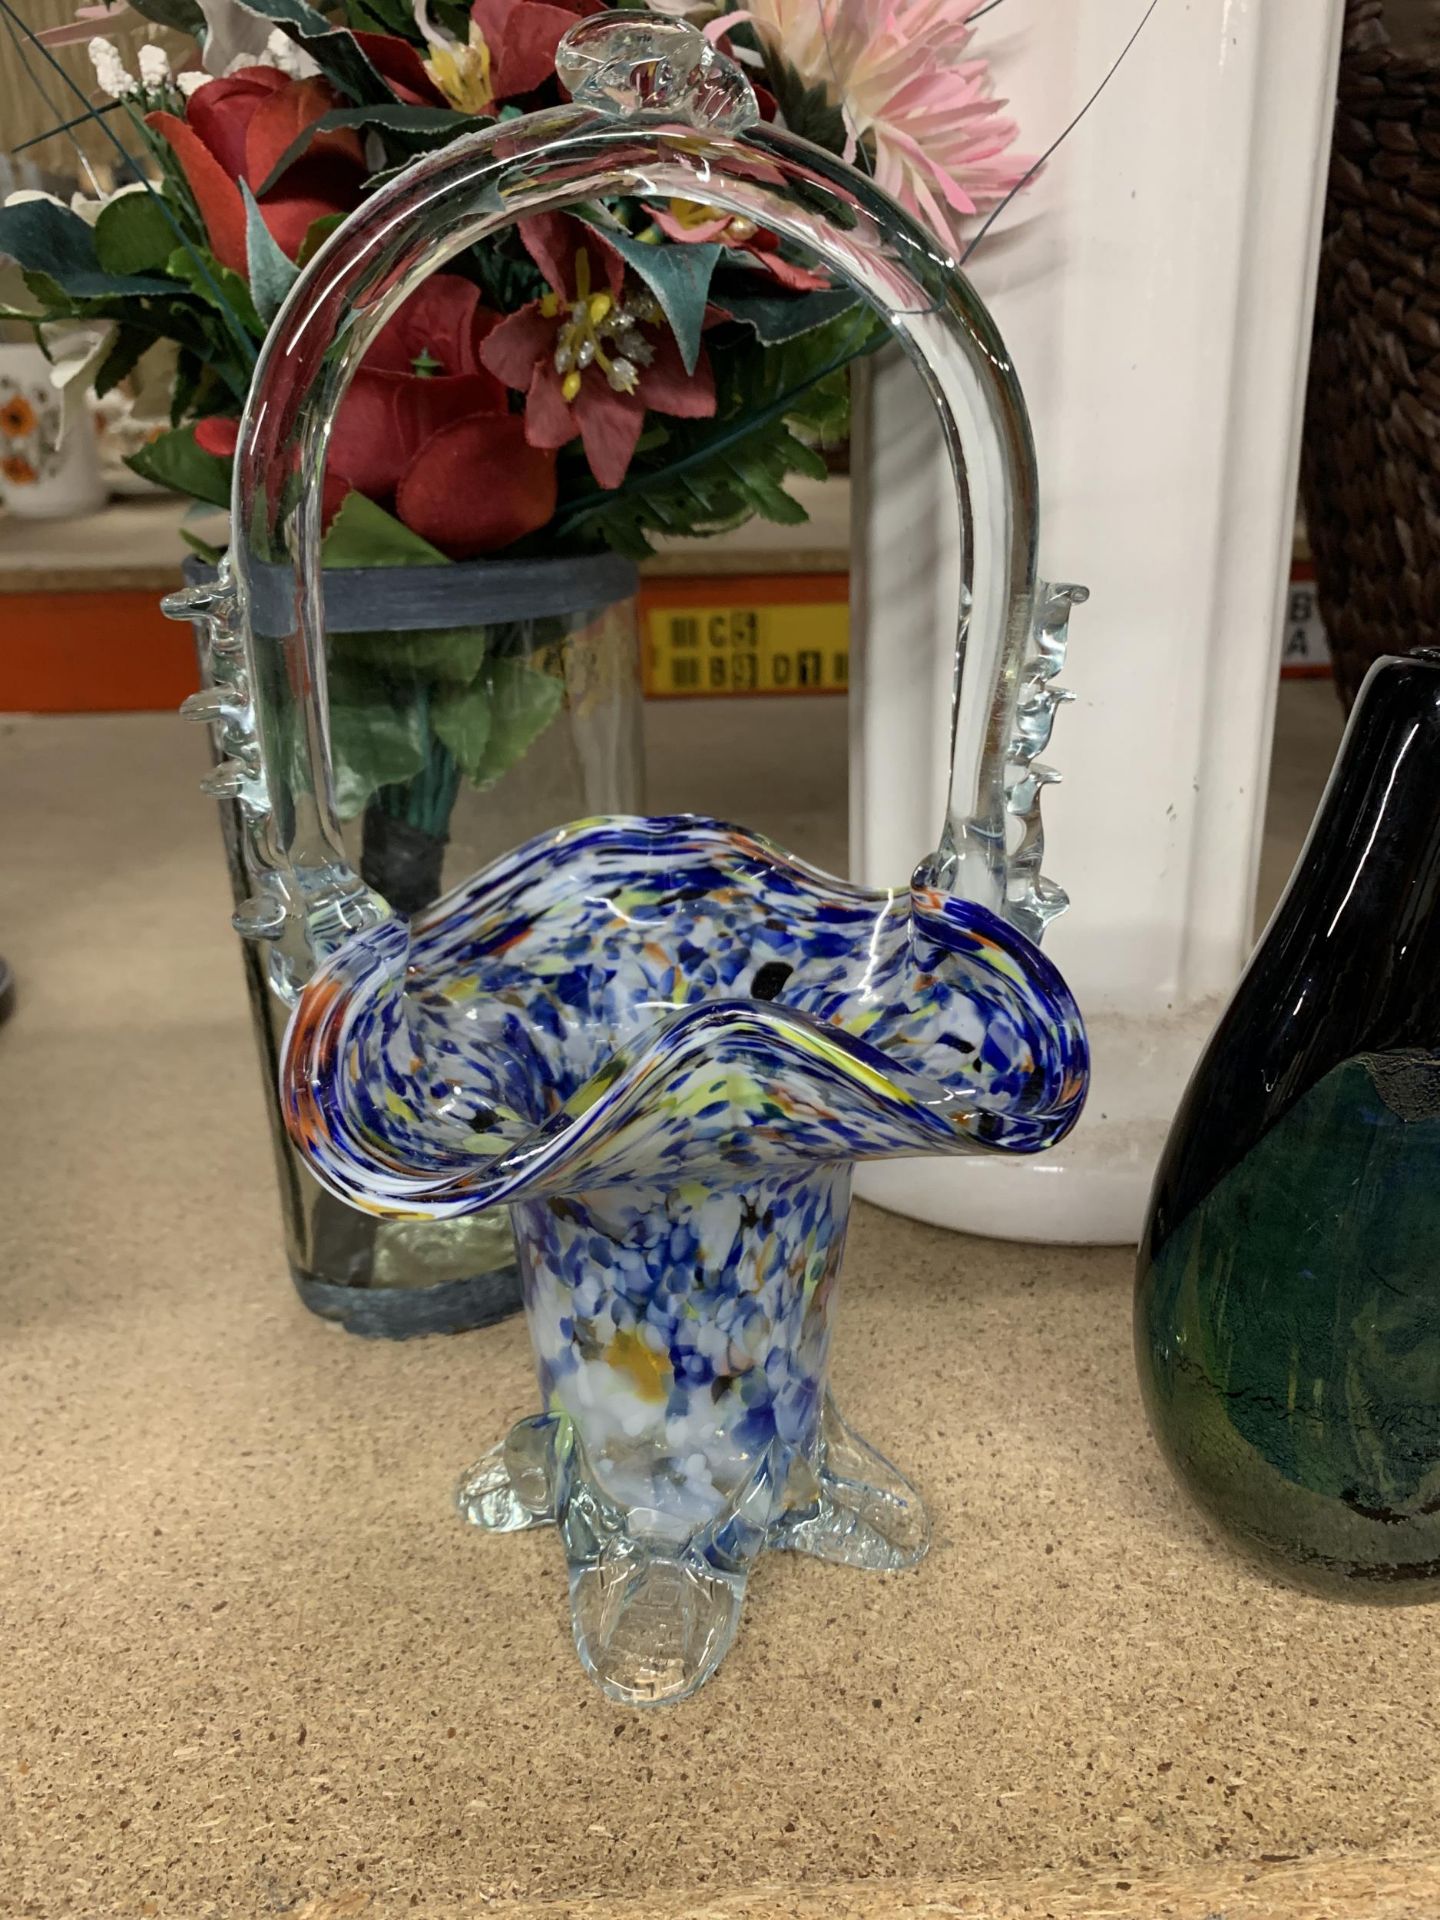 A JARDINERE PLANT STAND, HEIGHT 58CM, MURANO STYLE GLASS BASKET, ART GLASS VASE, DECANTER, ETC - Image 2 of 4